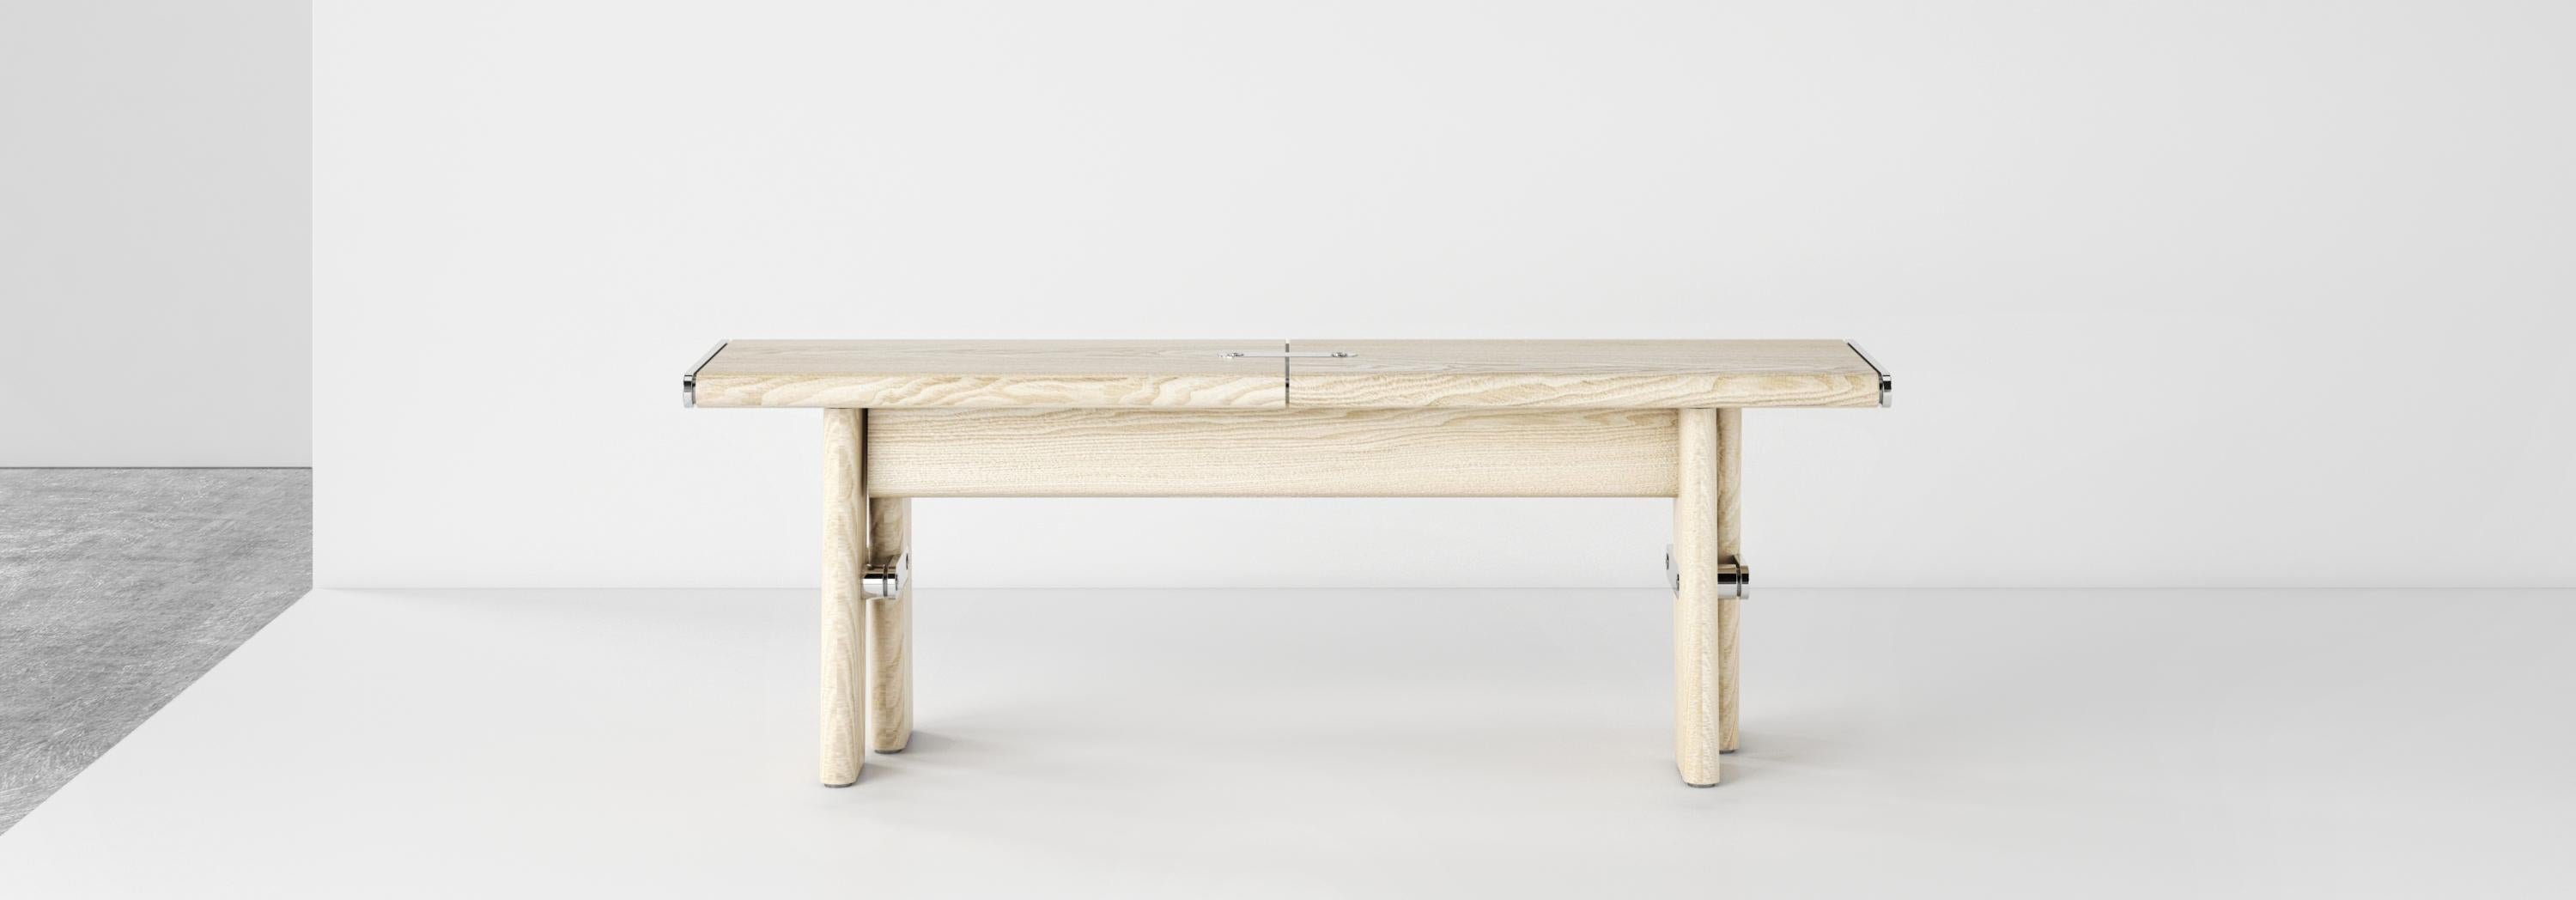 Named after its legs, which resemble those of a human being in motion, Walking Man bench is part of the product family consisting of a solid wood table and a matching bench. Made of solid wood, the products showcase the pure use of material and